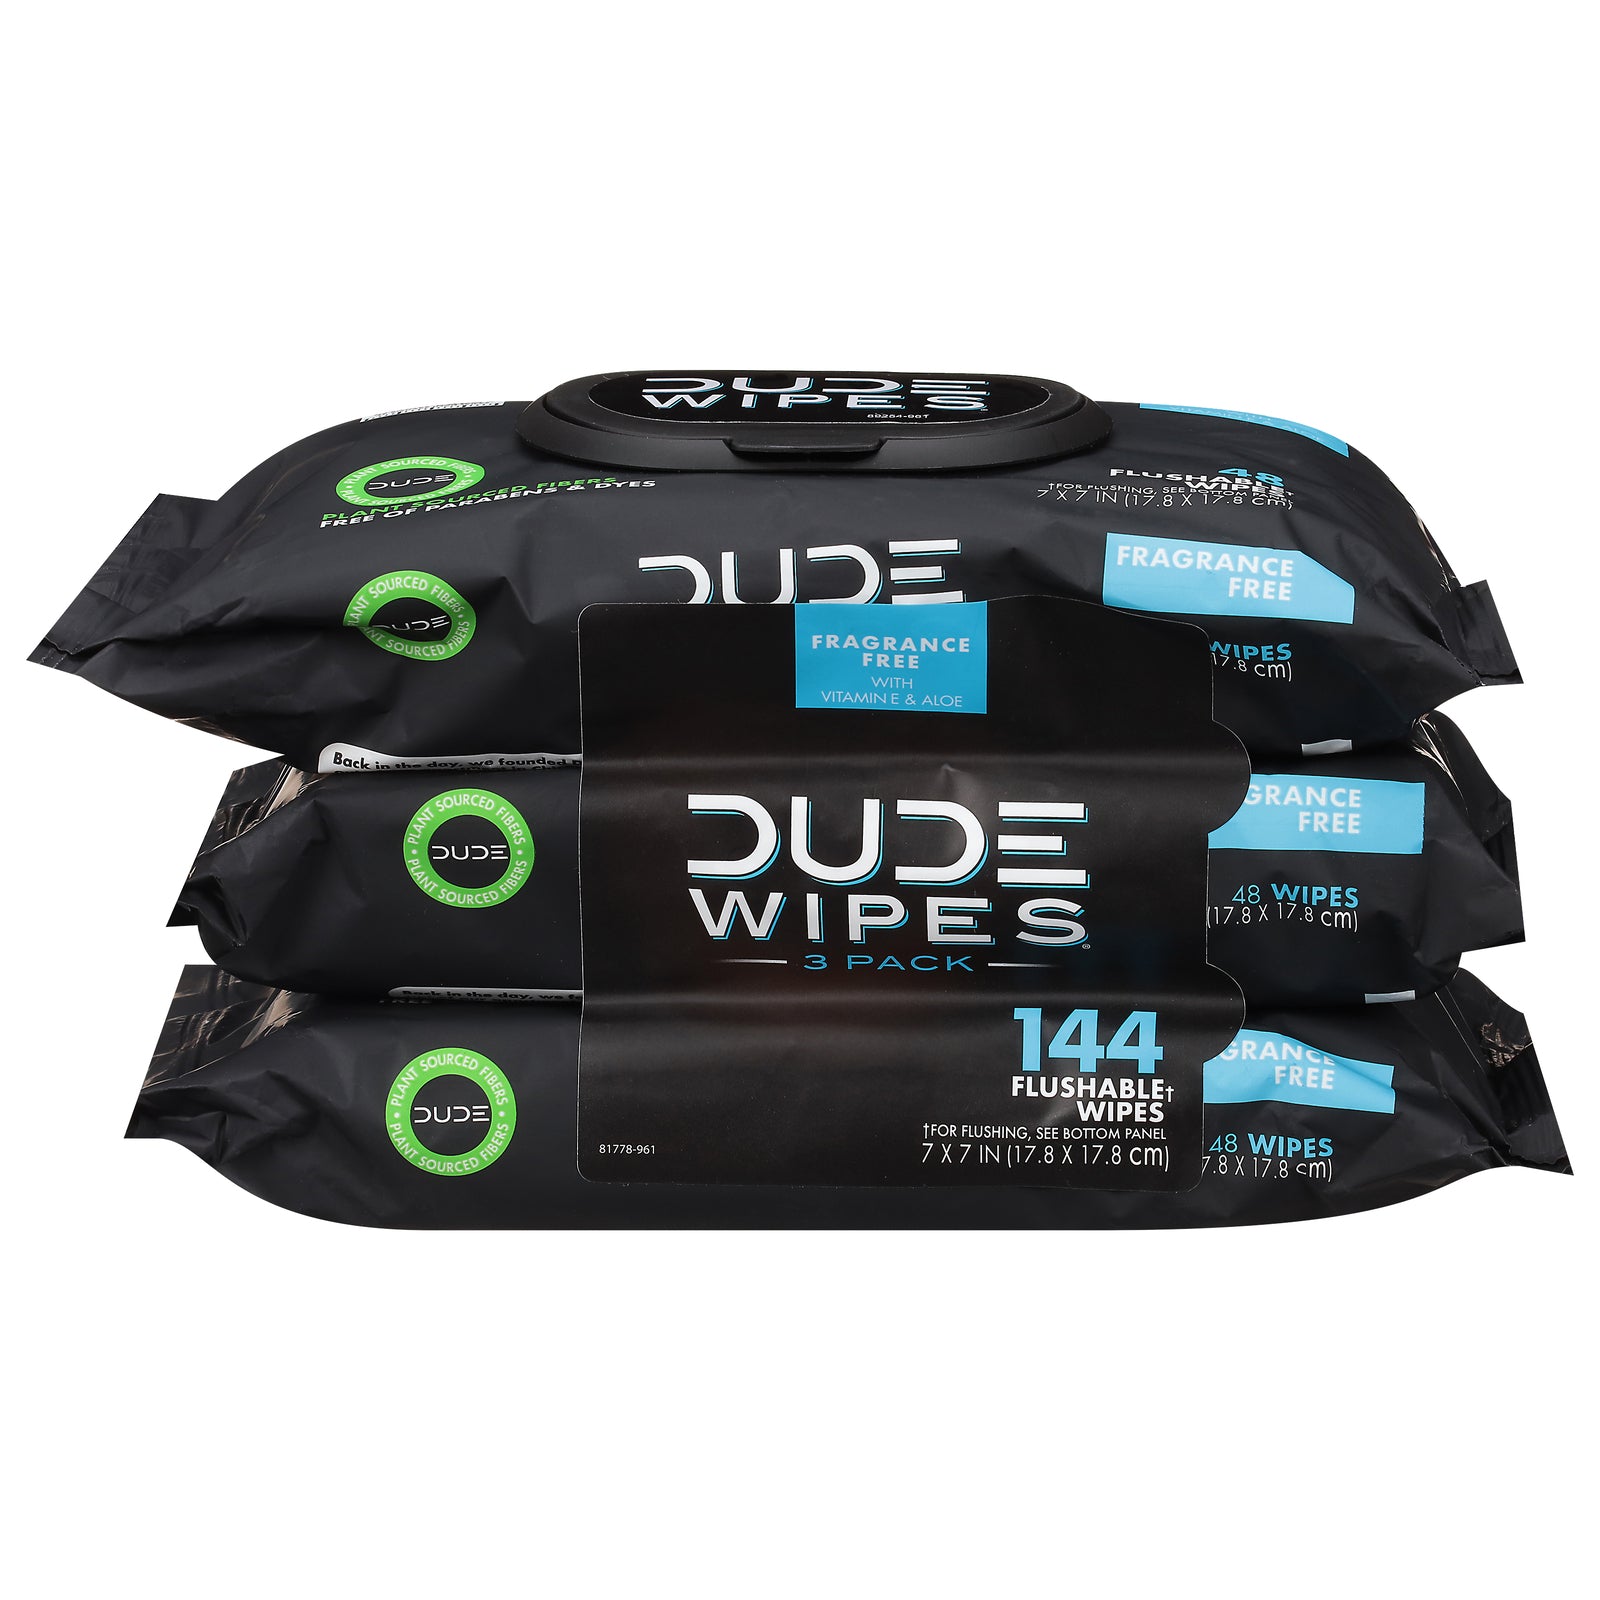 Dude Wipes - Wipes Unscnt Dspns Pack 3pk - Case of 4-144 CT